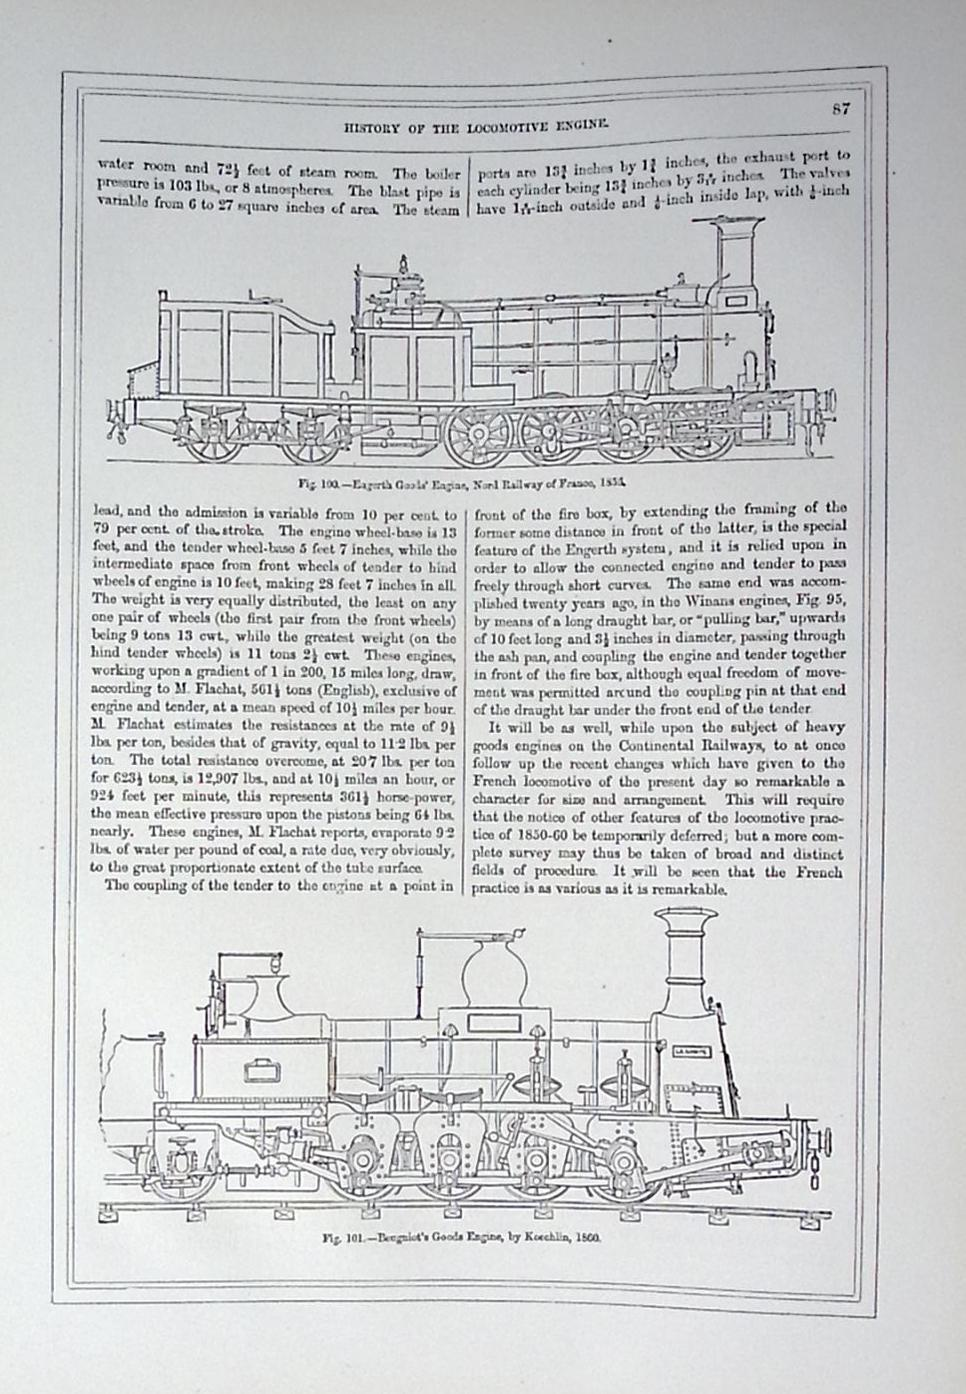 Locomotive Engineering, and the Mechanism of Railways: A Treatise on the Principles and Construction of the Locomotive Engine, Railway Carriages, and Railway Plant, with Examples. Volume I. Text.